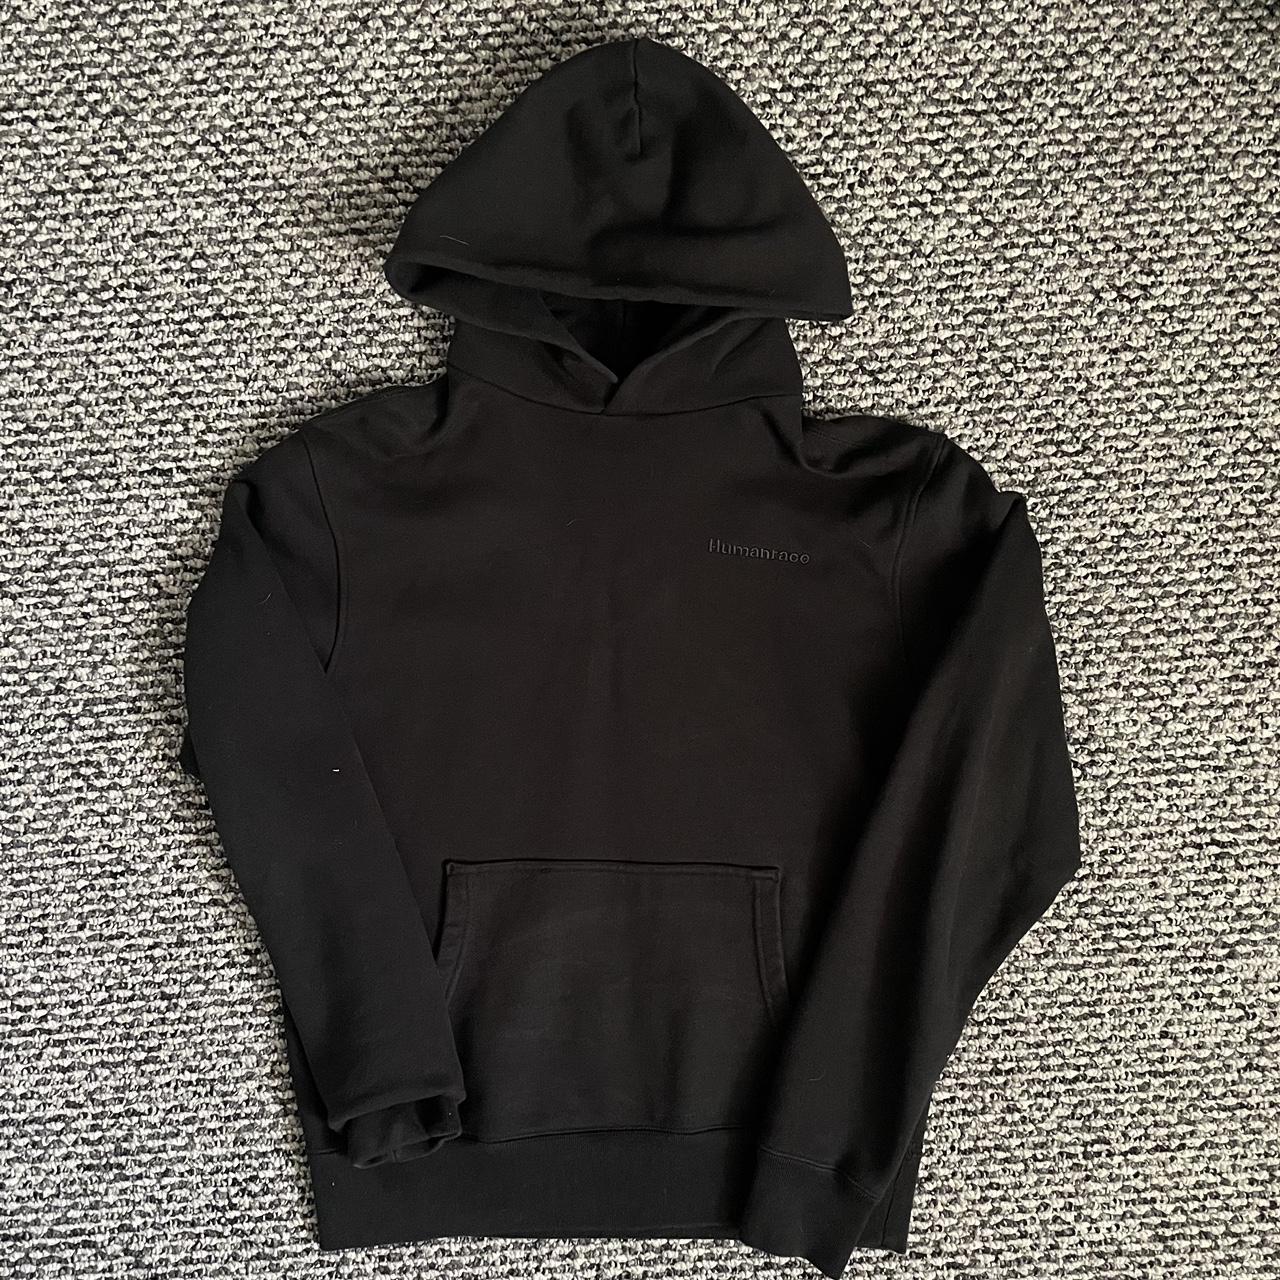 Adidas Humanrace Black Hoodie Size: Small Condition:... - Depop